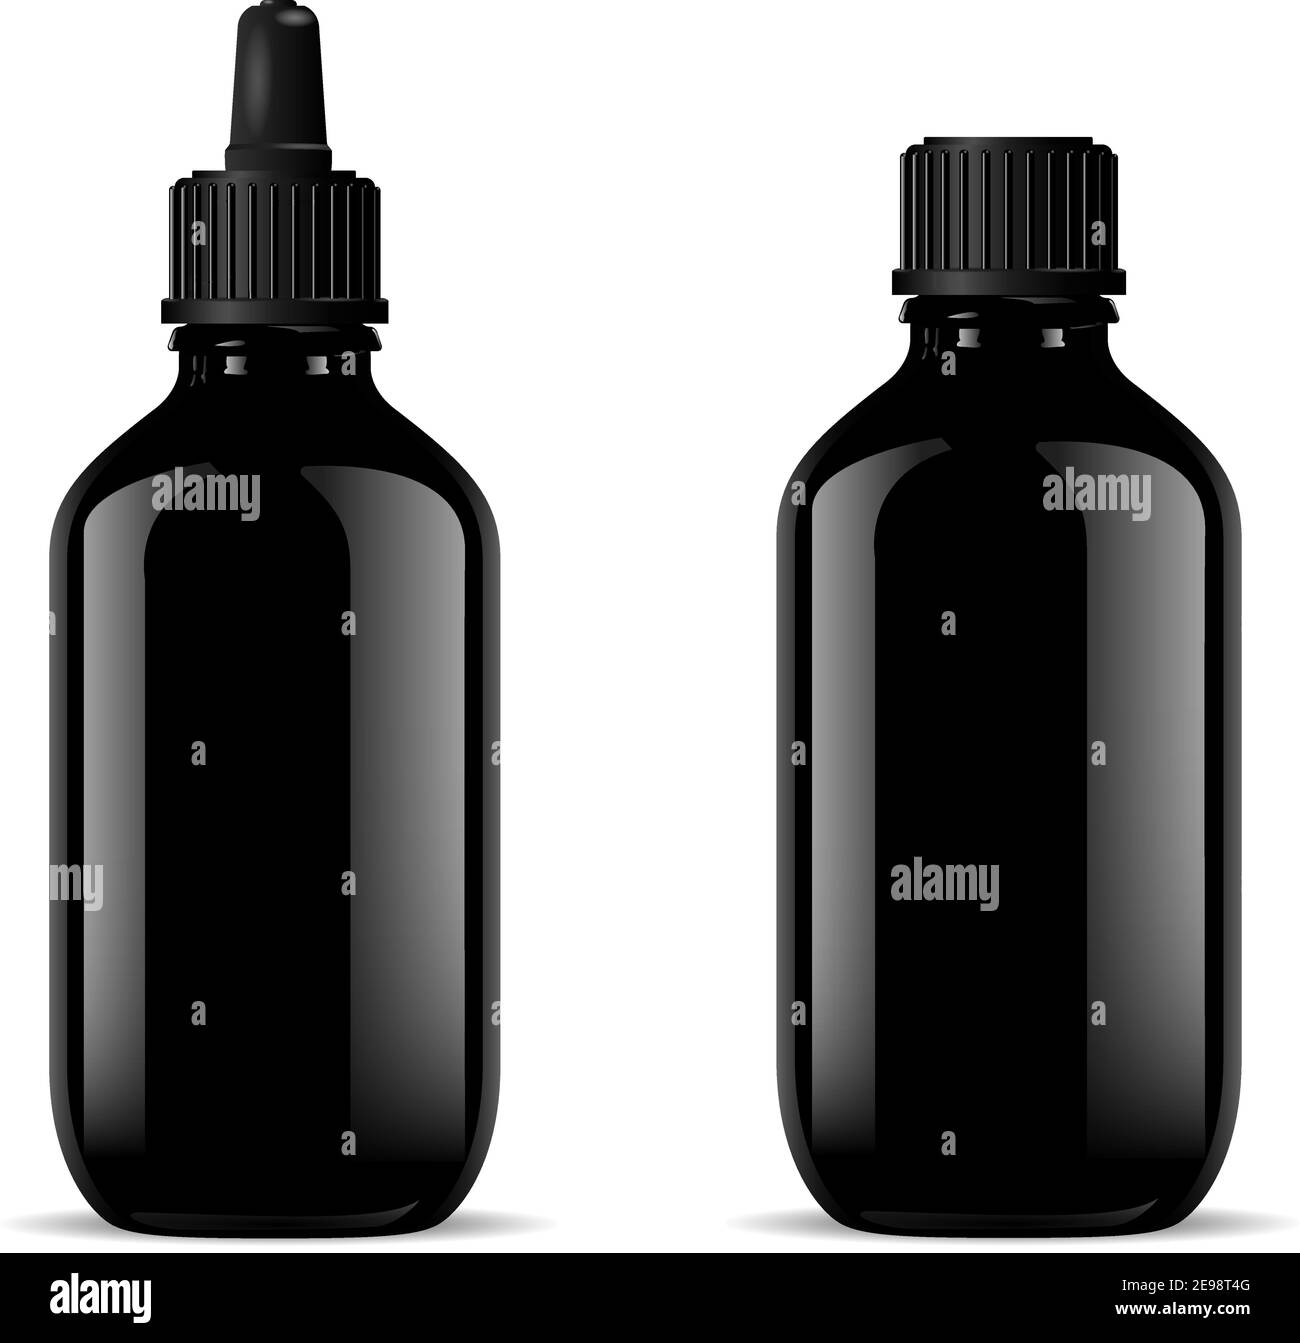 Black Glass Medical Bottles Set. Dropper Mockup. Screw Lid Flask with Pipette for Pharmaceutical Product Syrup, Oil, Nasal Liquid, Essence. Pharmacy J Stock Vector